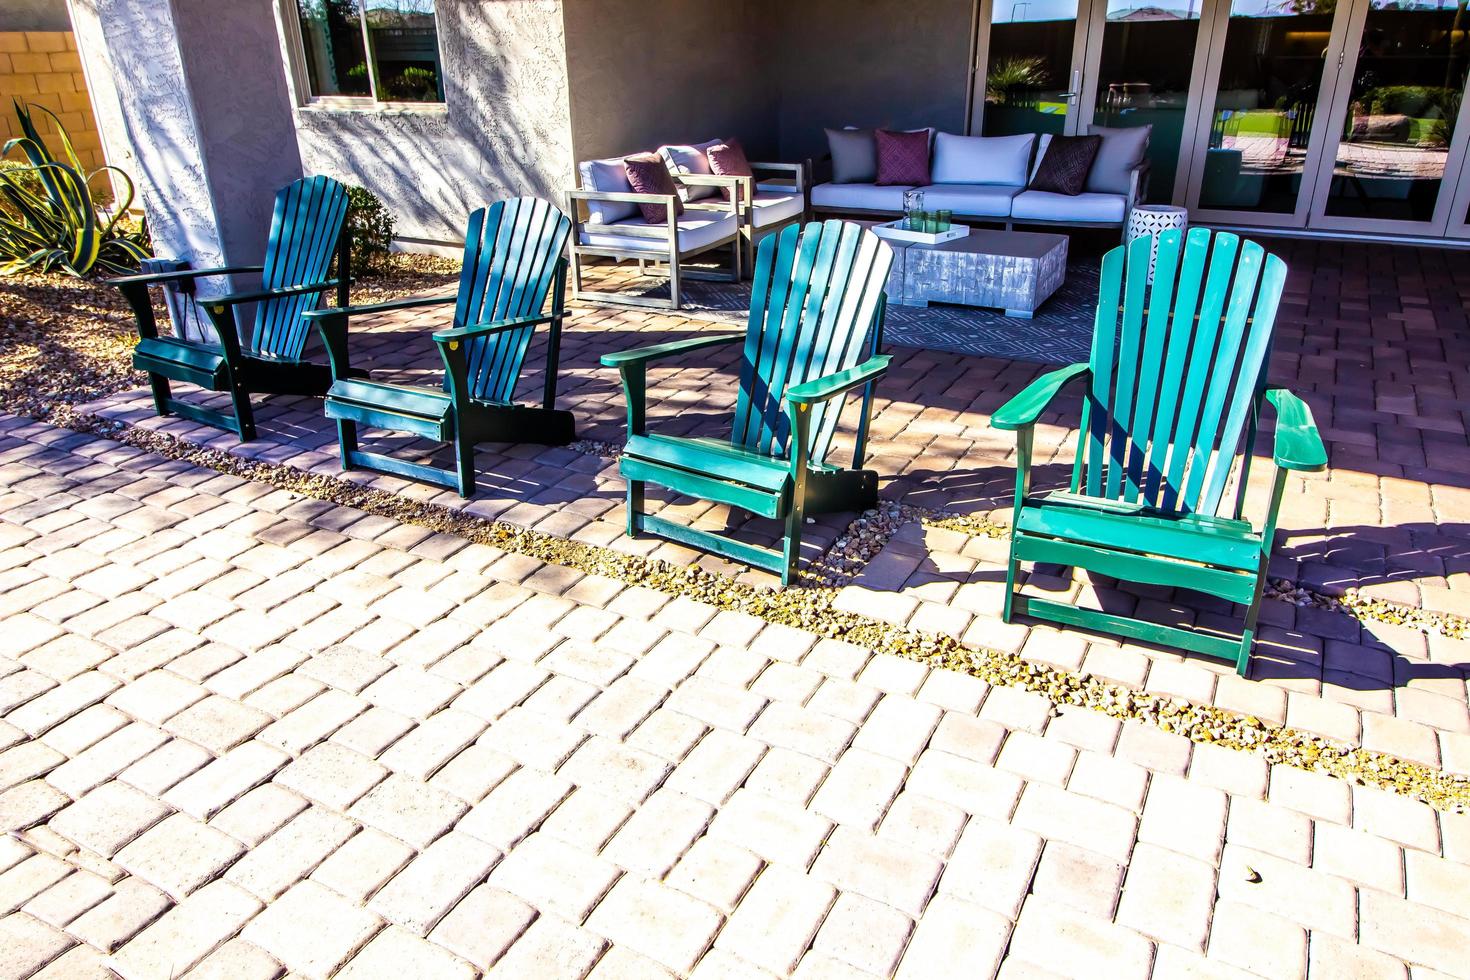 Four Green Lawn Arm Chairs On Back Yard Paver Patio photo